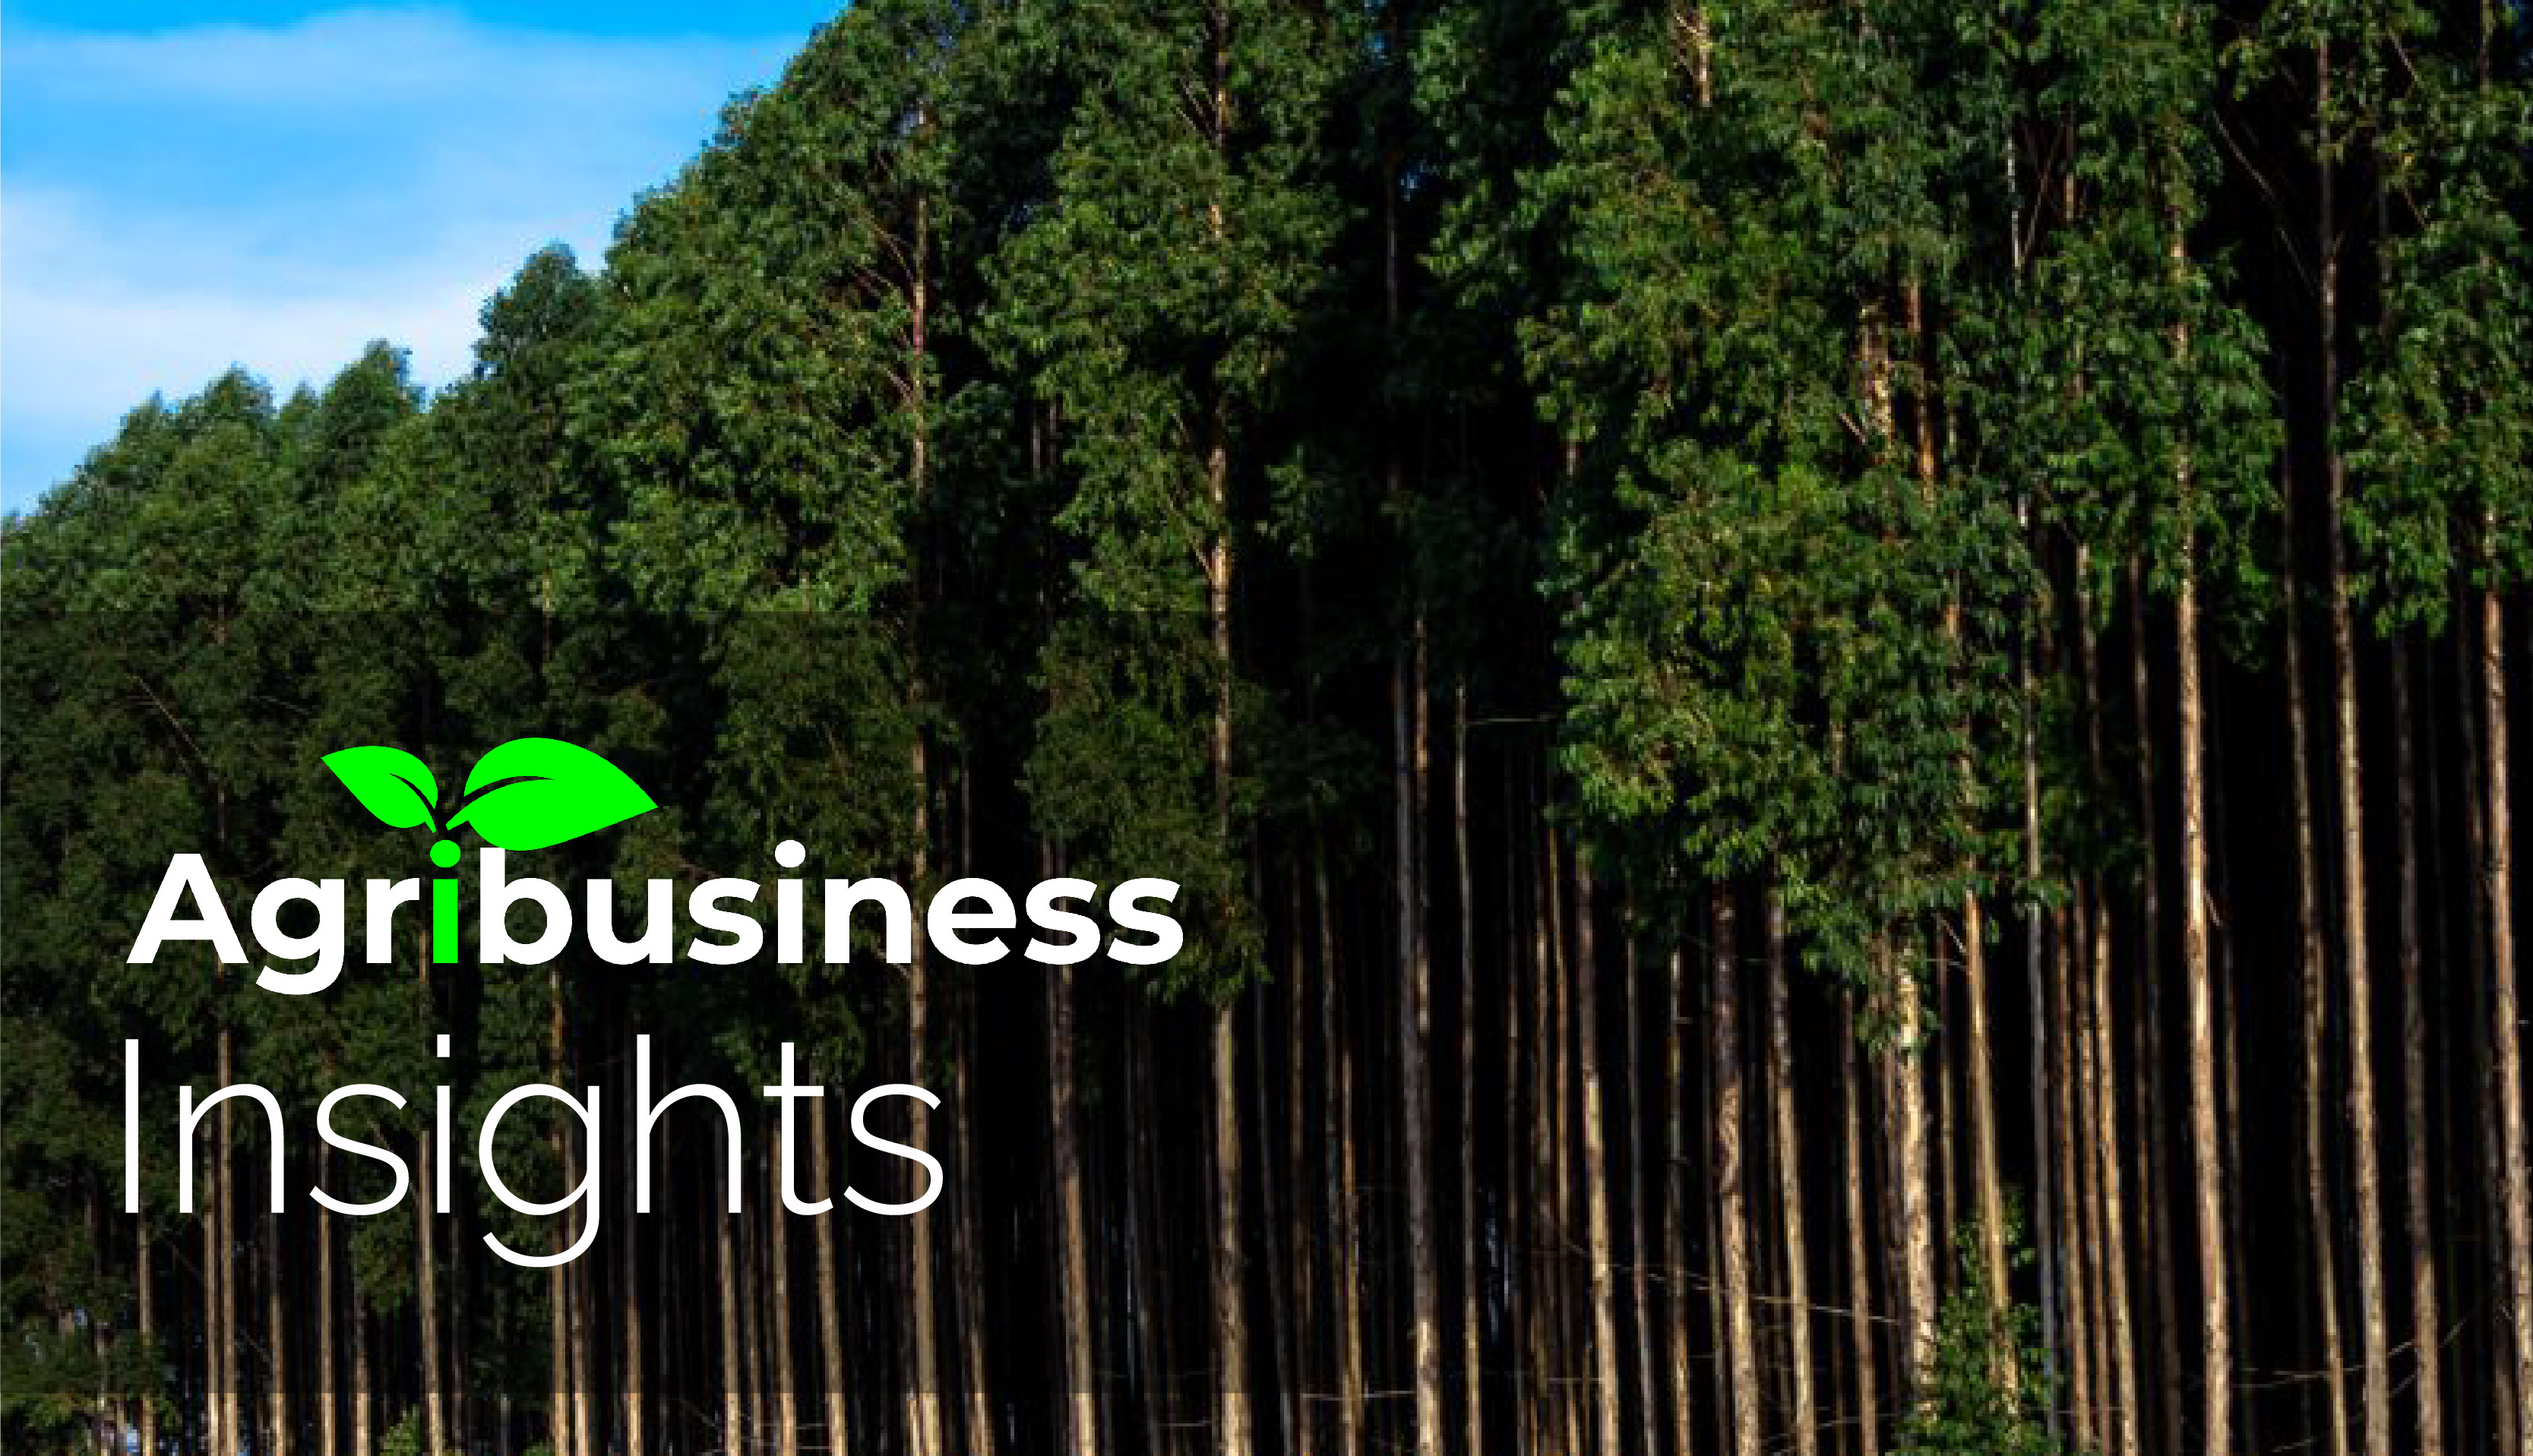 Agribusiness insights (Tree planting)